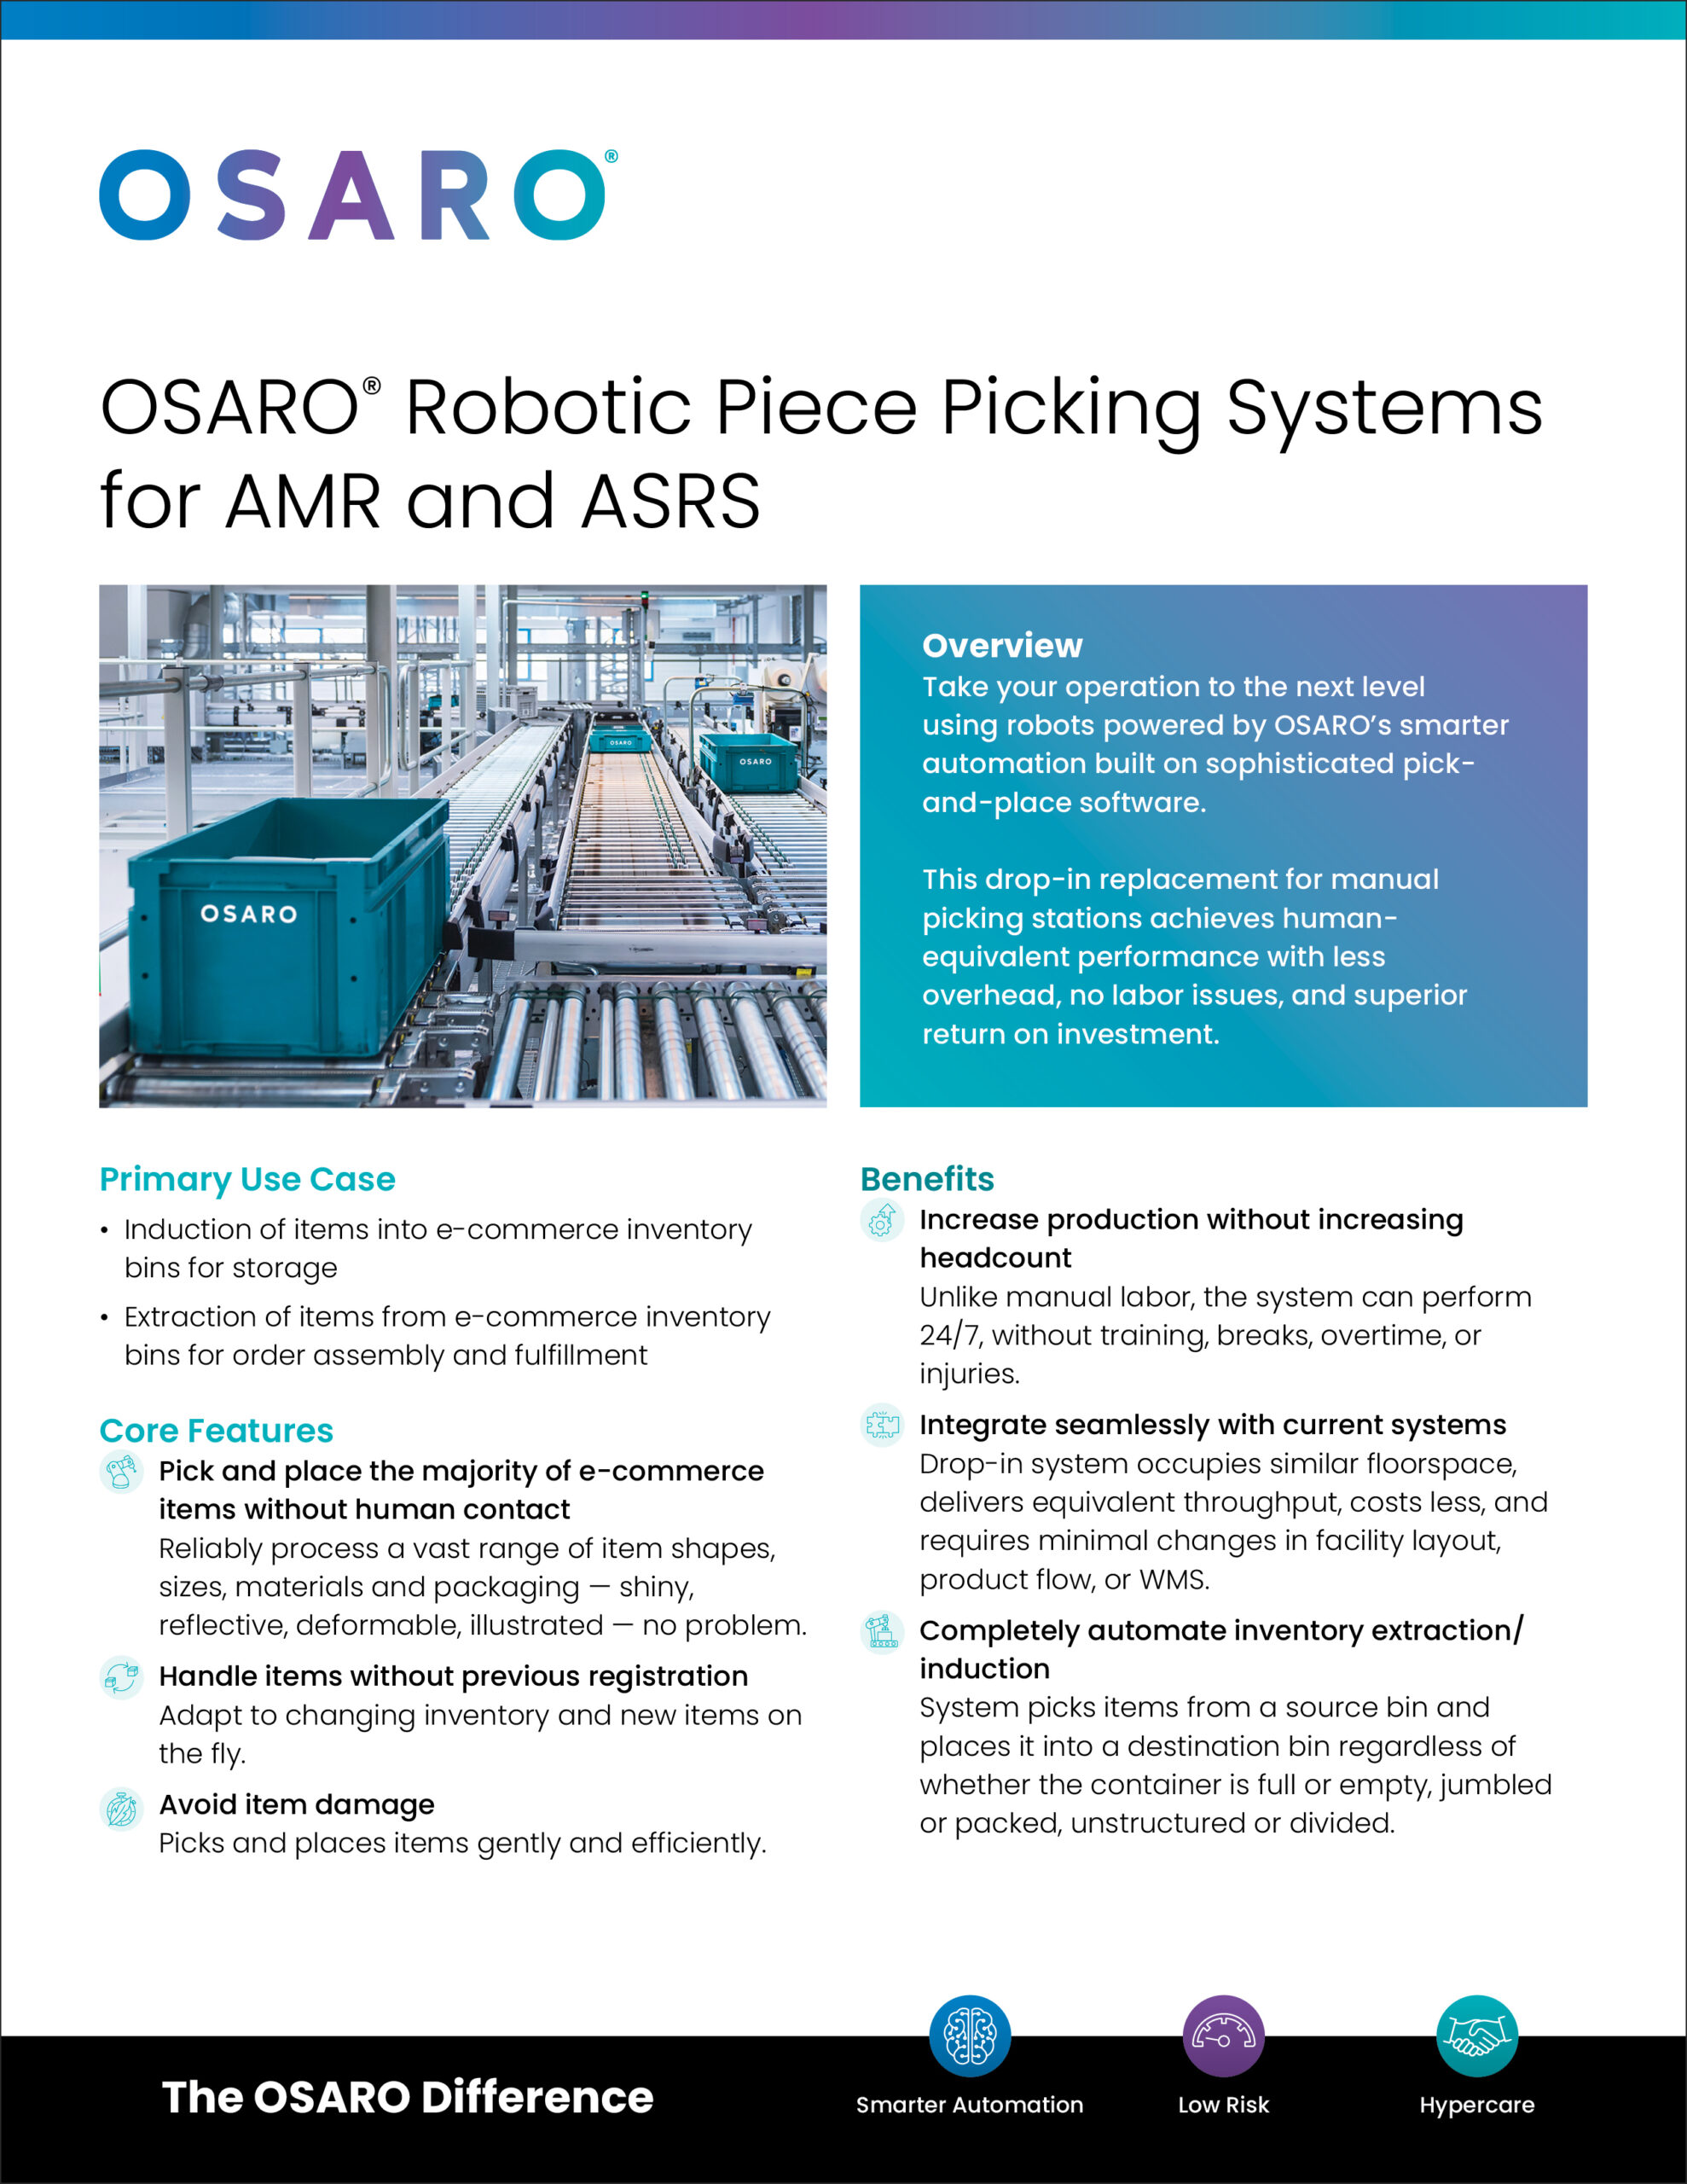 OASRO Robotic Piece Picking for AMR/ASRS